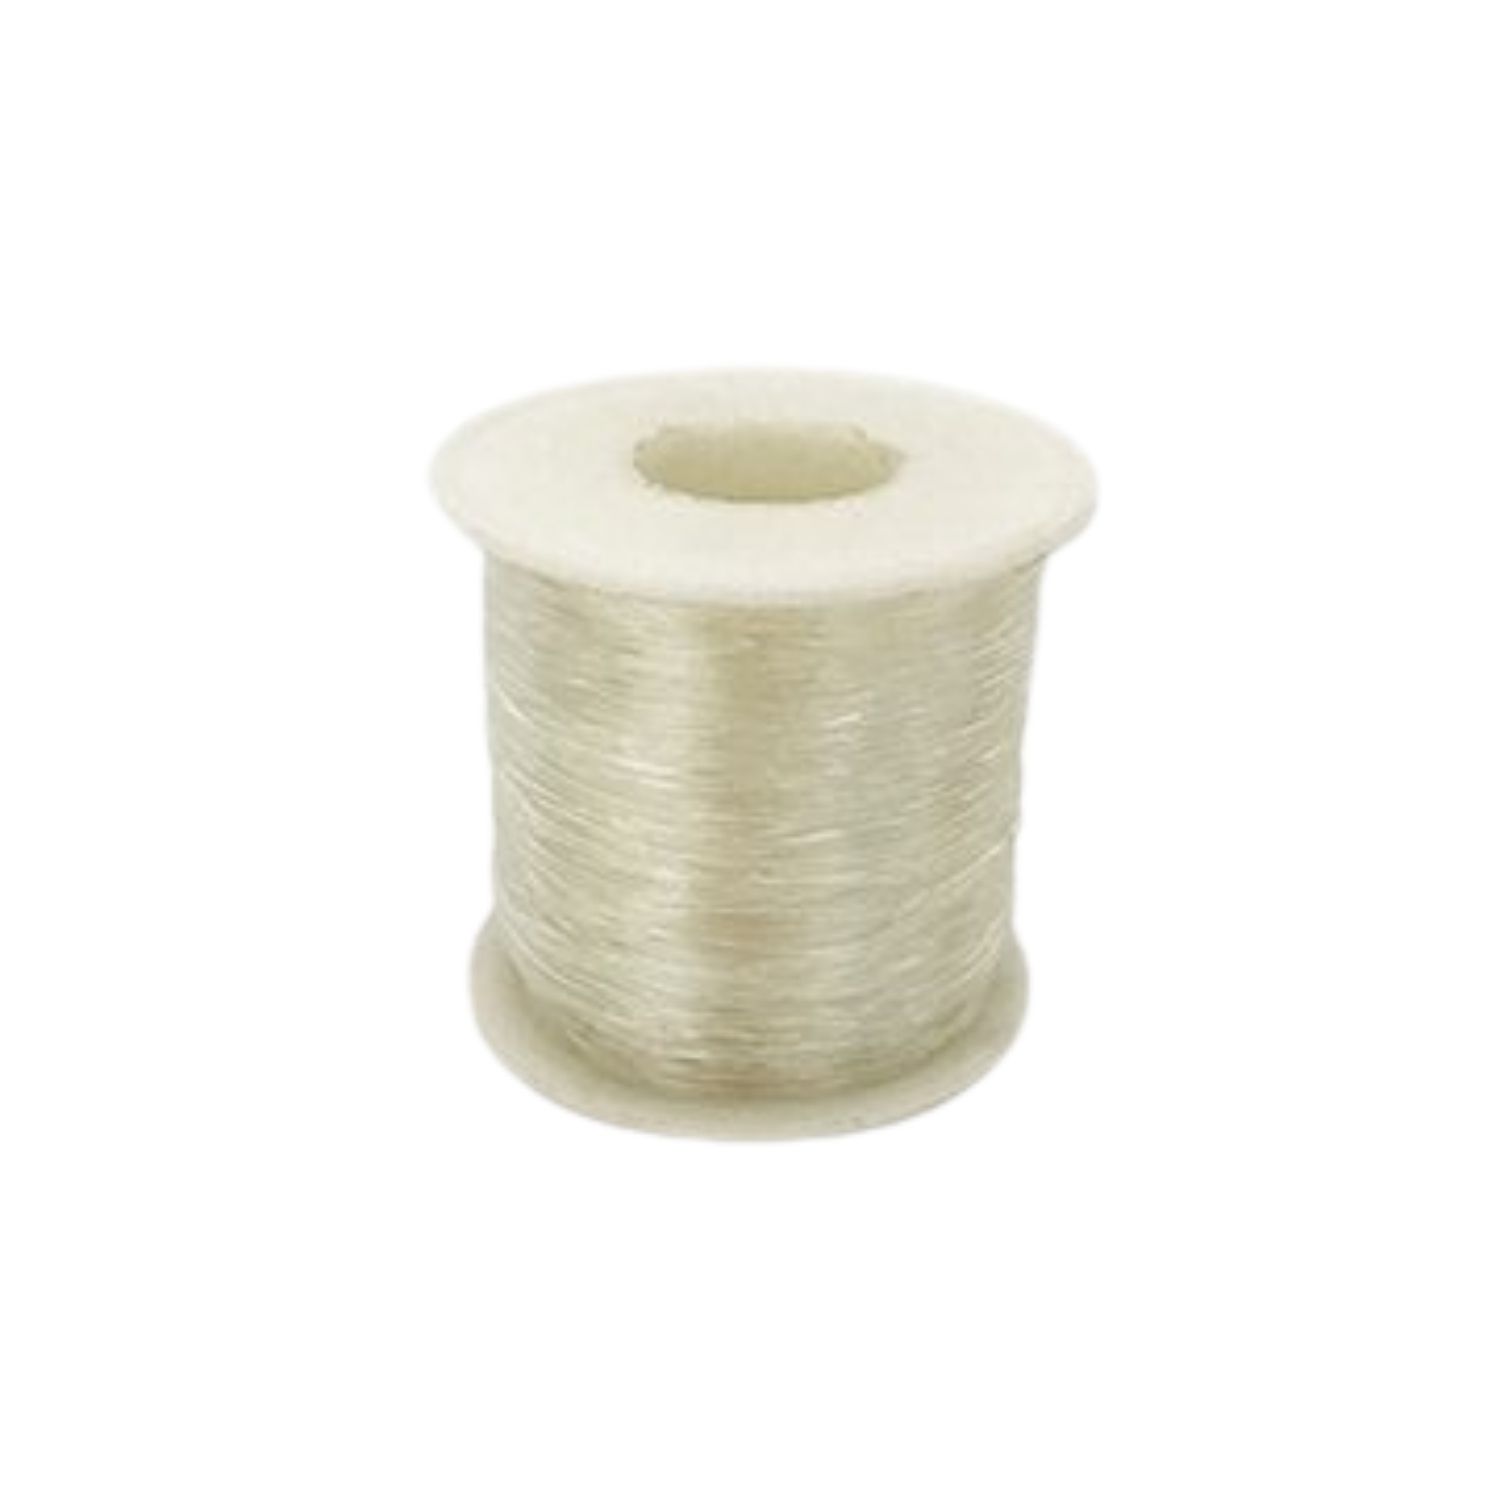 100m clear stretch beading cord - DBLG Import